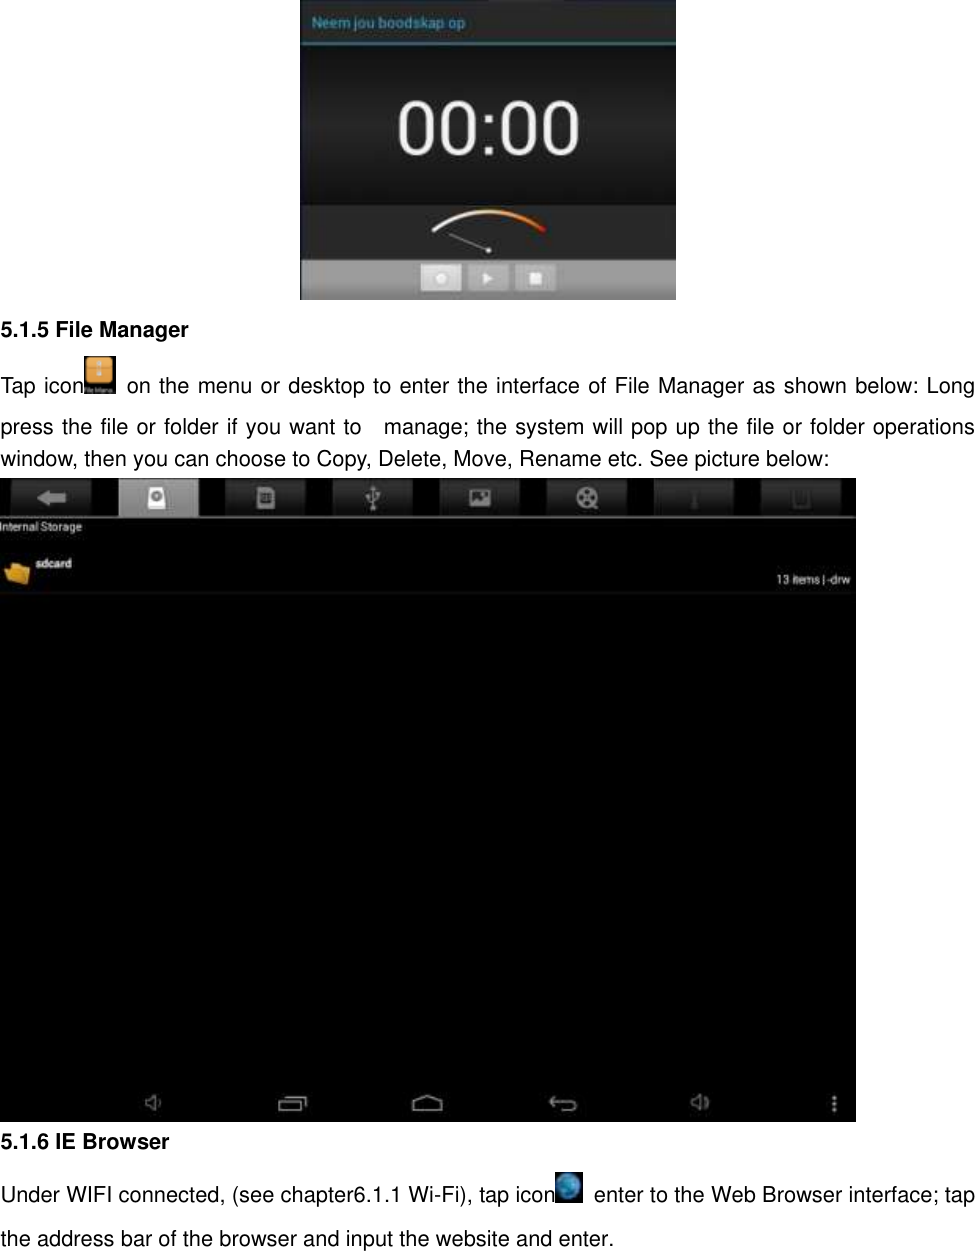   5.1.5 File Manager Tap icon   on the menu or desktop to enter the interface of File Manager as shown below: Long press the file or folder if you want to    manage; the system will pop up the file or folder operations window, then you can choose to Copy, Delete, Move, Rename etc. See picture below:  5.1.6 IE Browser   Under WIFI connected, (see chapter6.1.1 Wi-Fi), tap icon   enter to the Web Browser interface; tap the address bar of the browser and input the website and enter. 